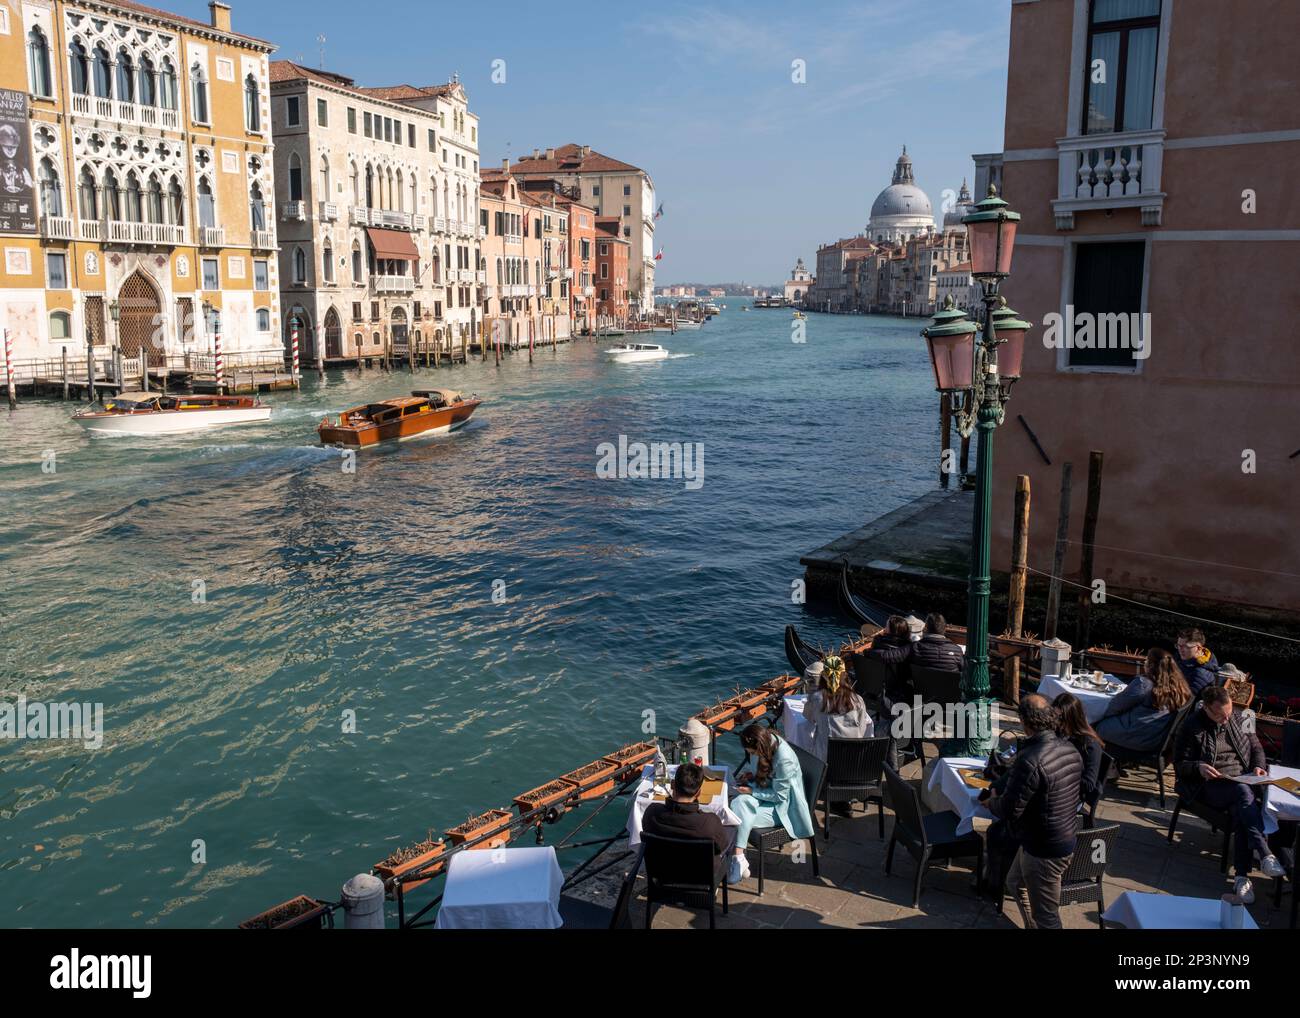 View from the Accademia Bridge of the  Grand Canal, Venice, Italy Stock Photo